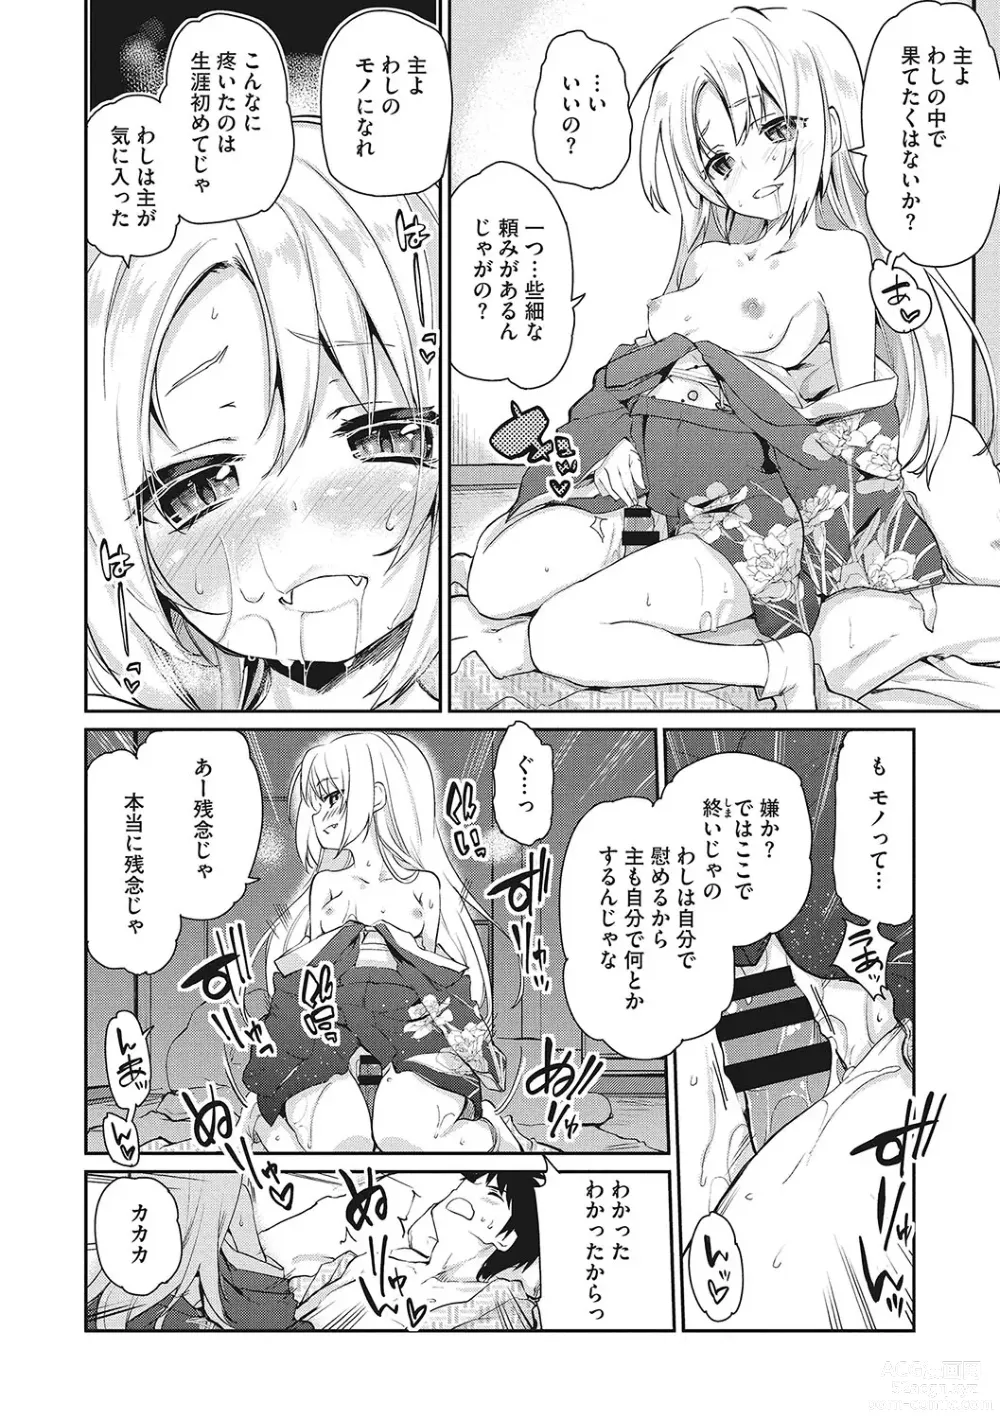 Page 19 of manga LQ -Little Queen- Vol. 54